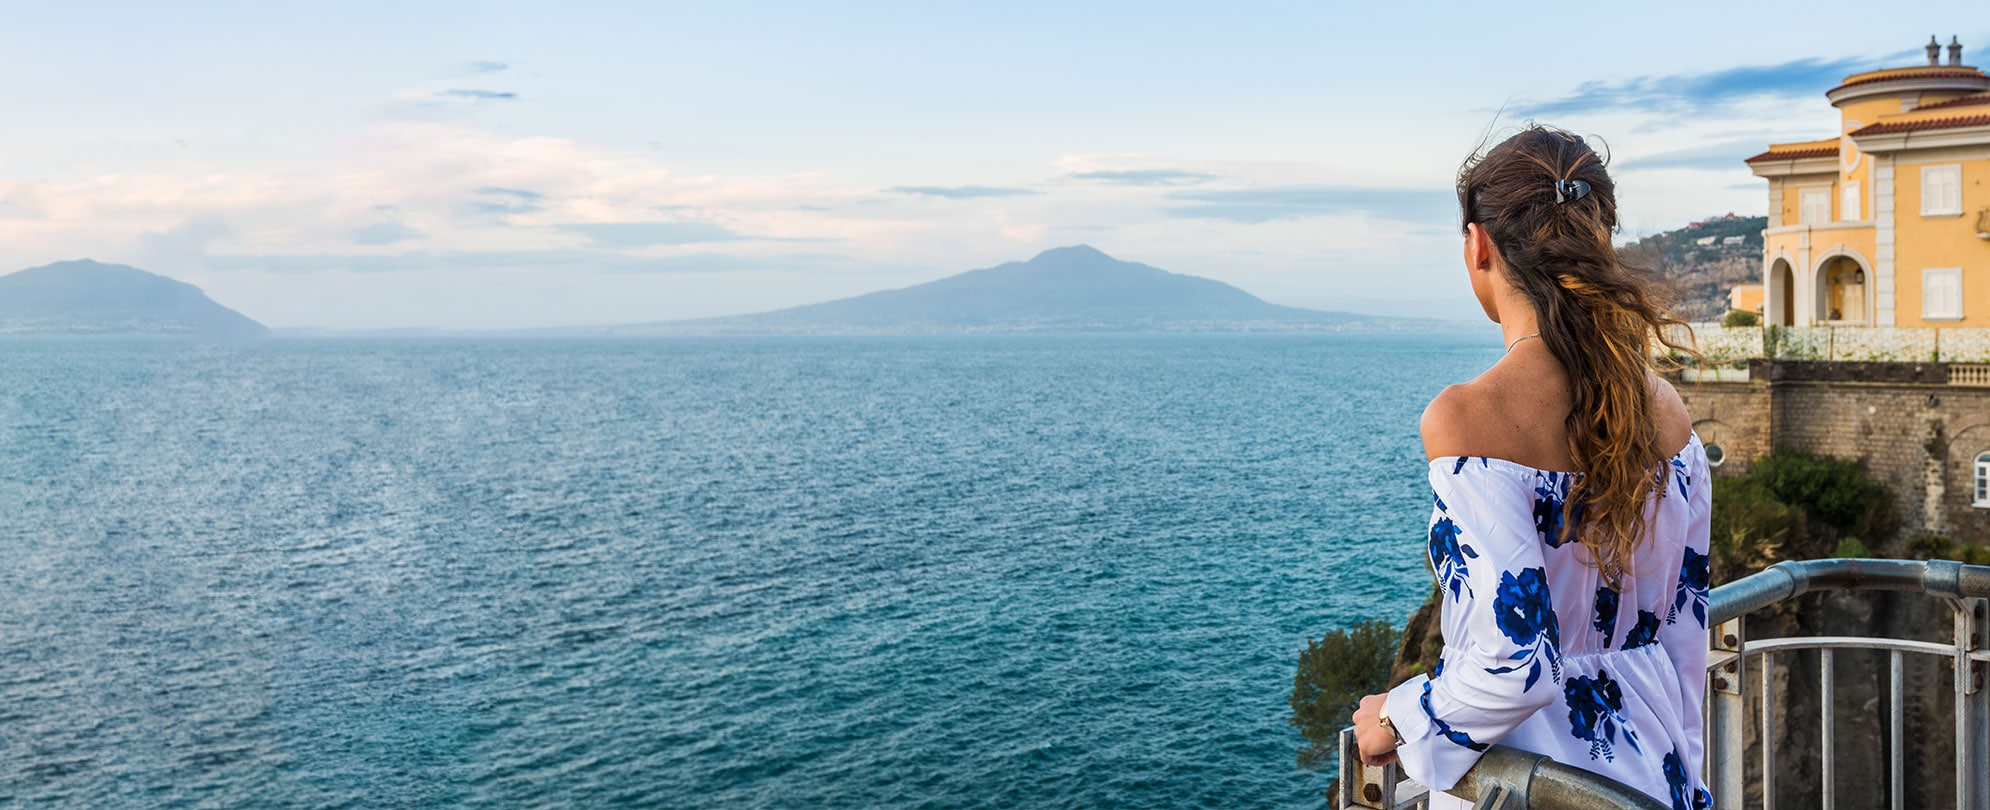 A woman looking out over the ocean and mountains in Sorrento, Italy.